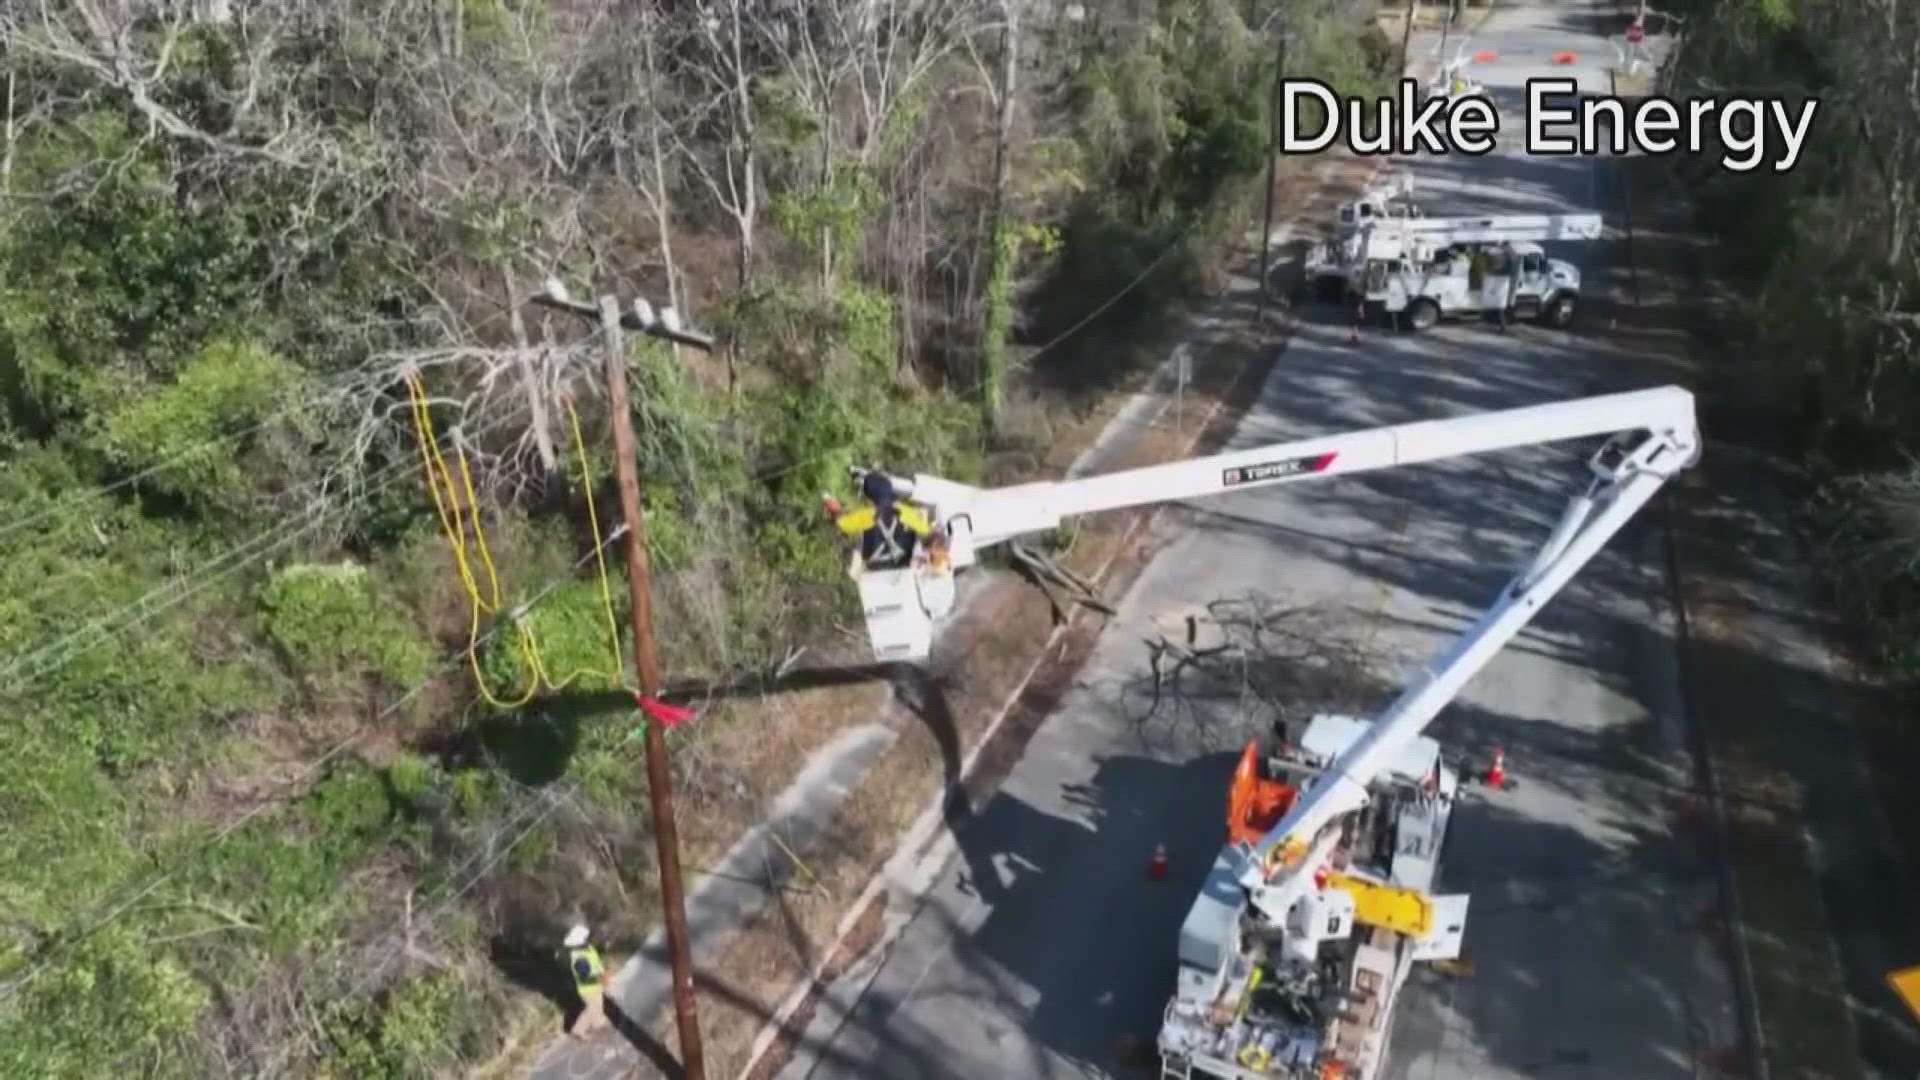 After rolling blackouts and pleas to conserve power, Duke Energy says most of its power service has been restored to normal.